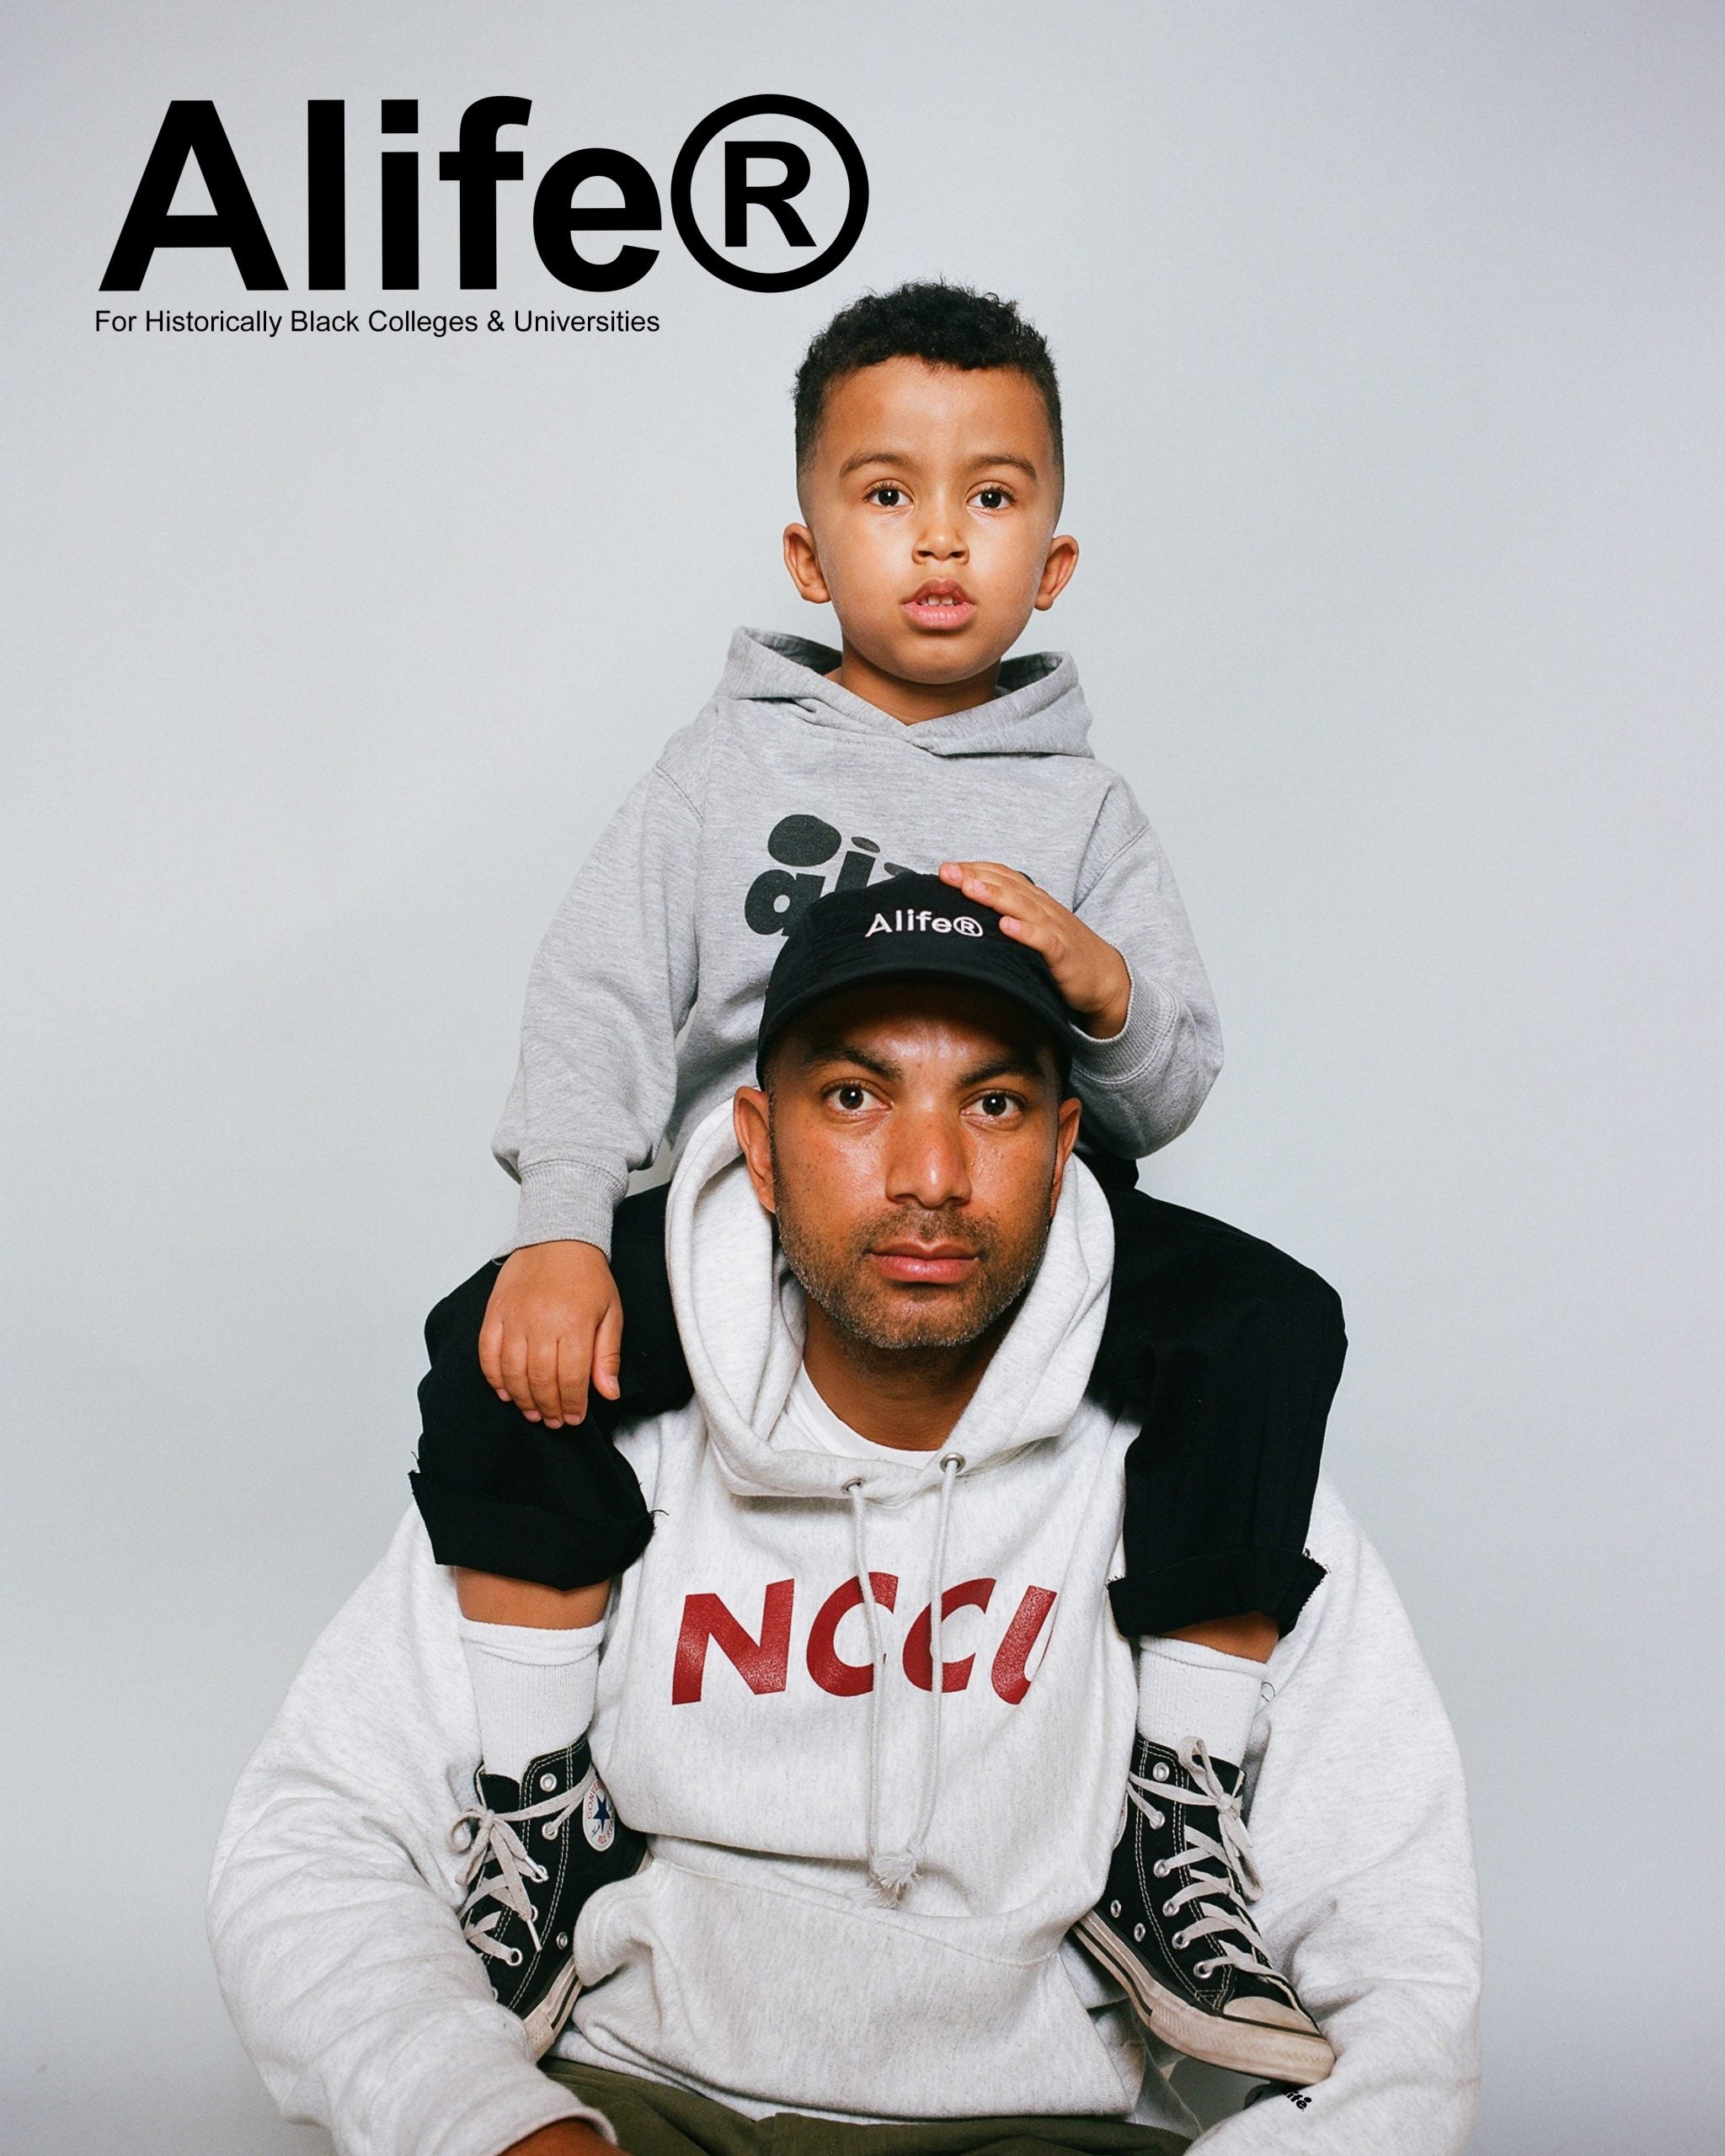 Alife(R) Teams Up With Urban Outfitters To Create HBCU Capsule Collection